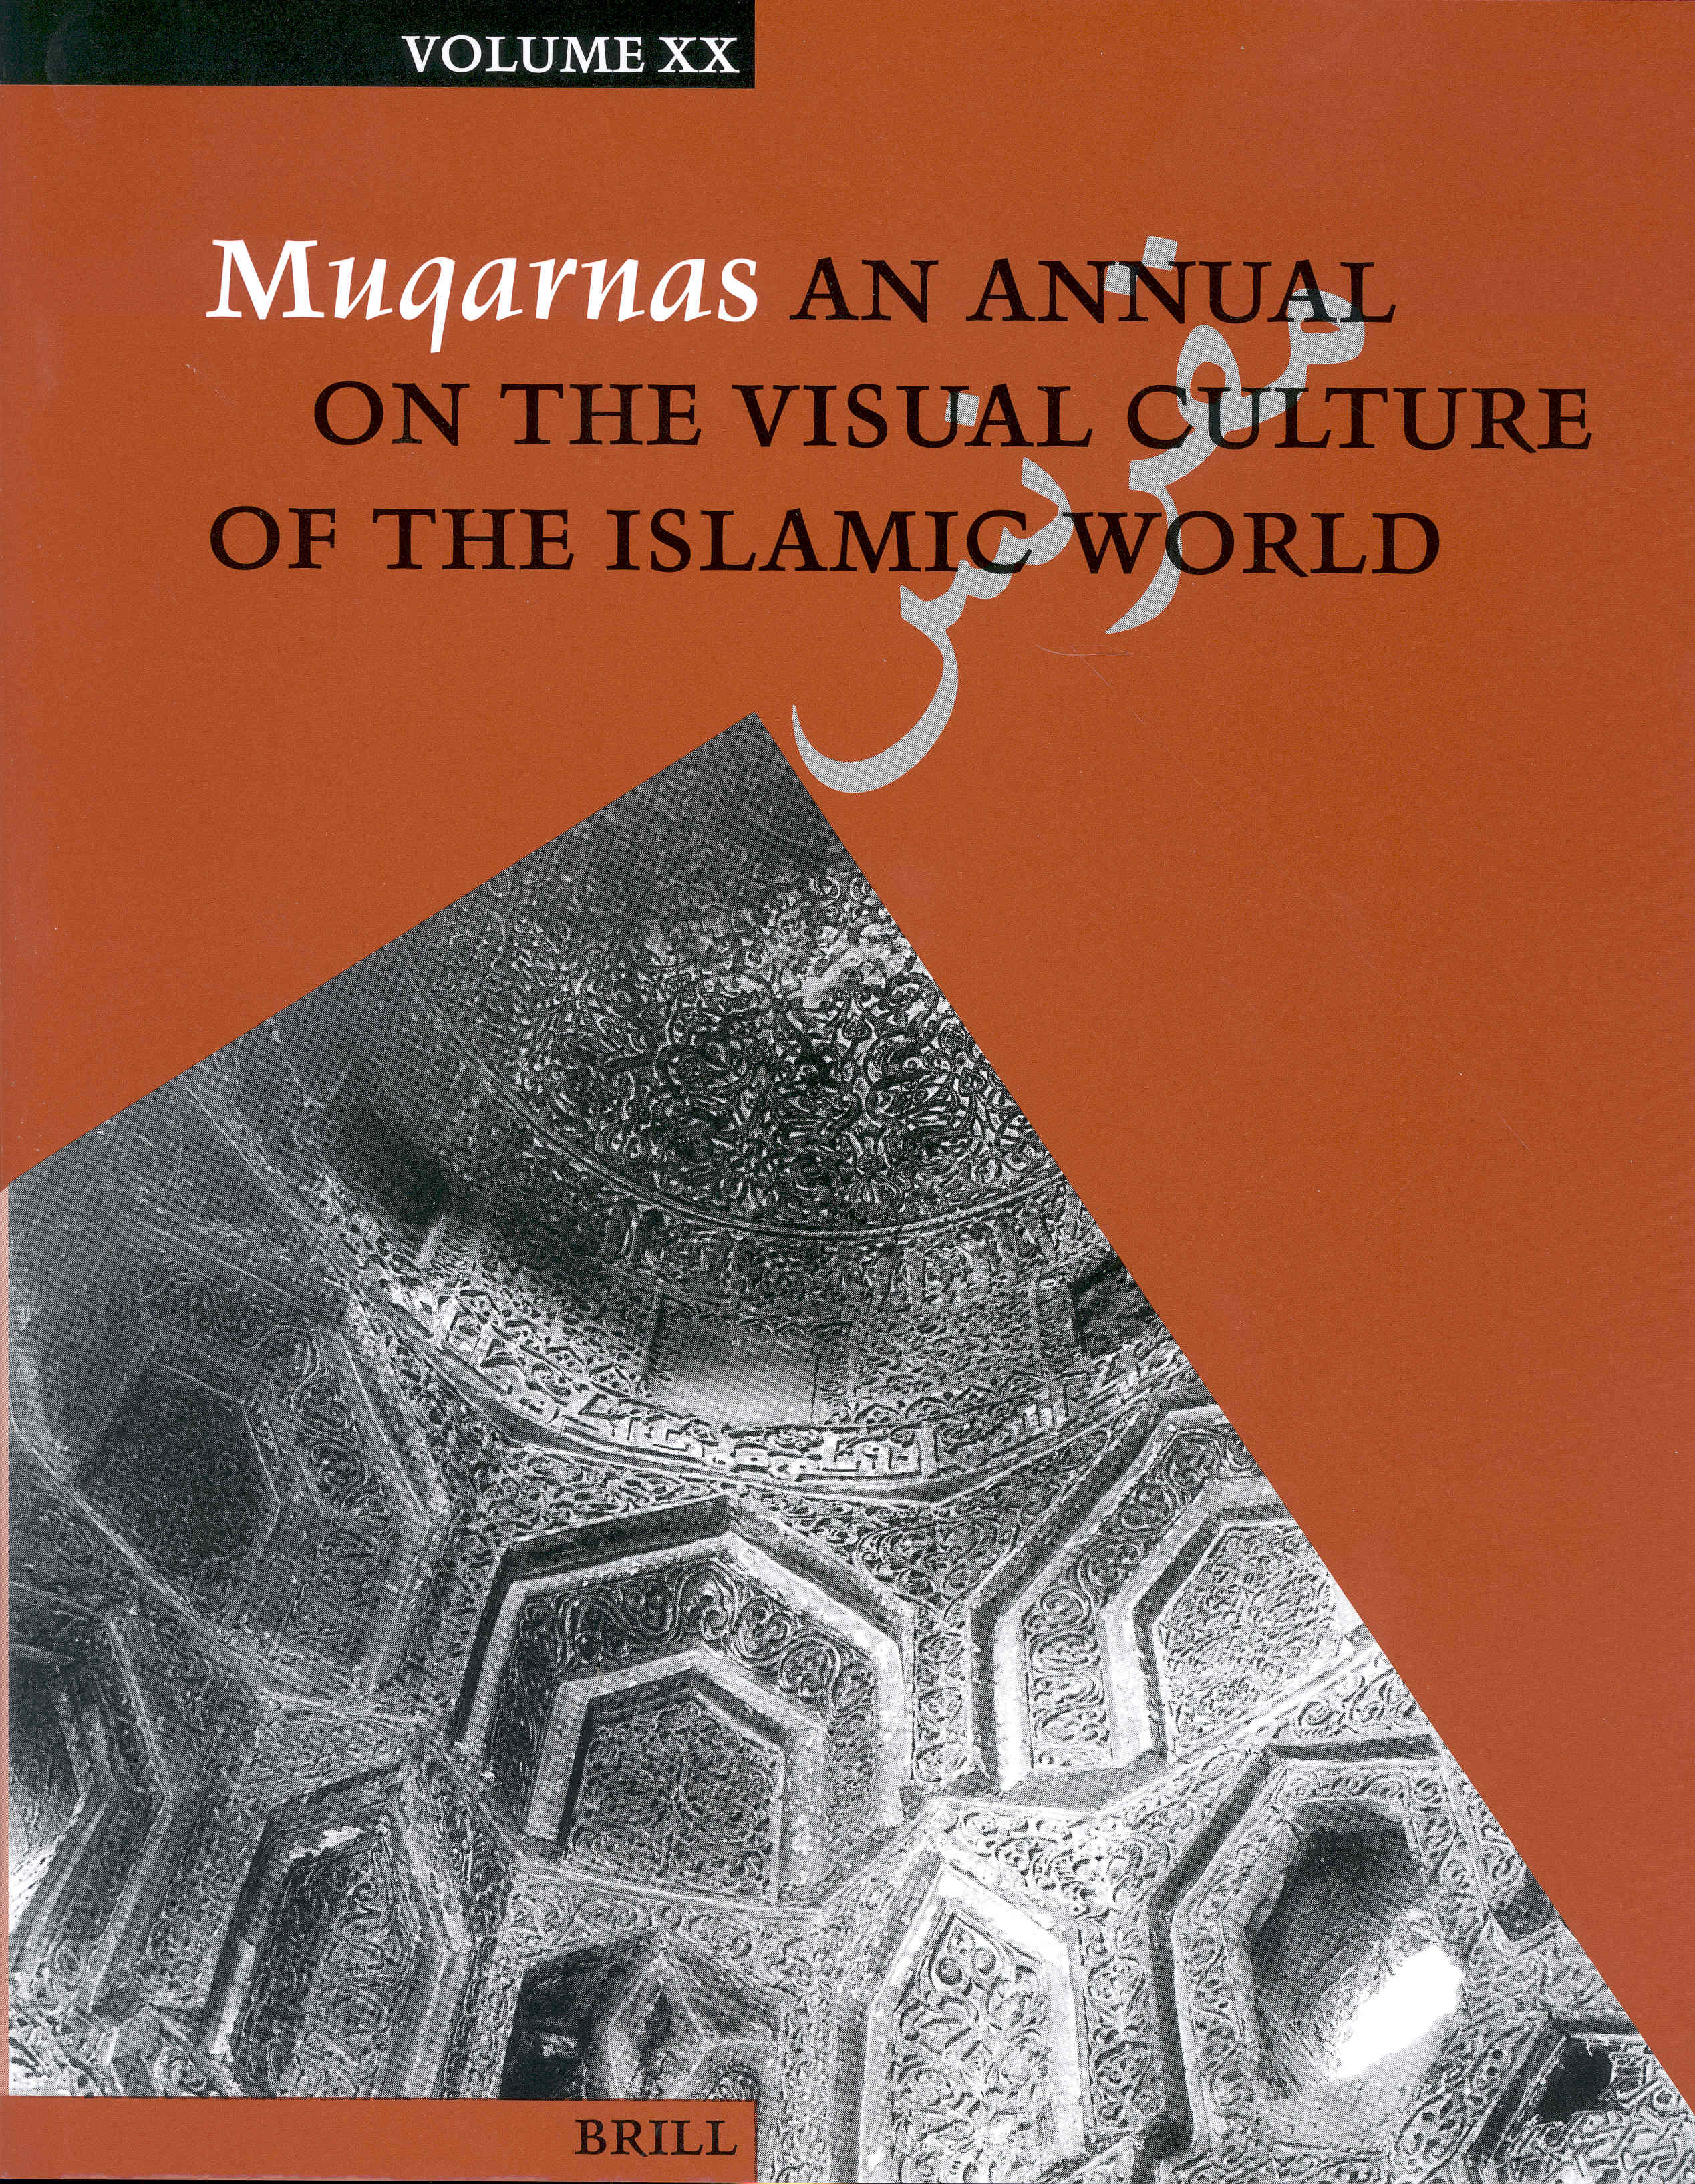 Muqarnas Volume XX: An Annual on the Visual Culture of the Islamic World